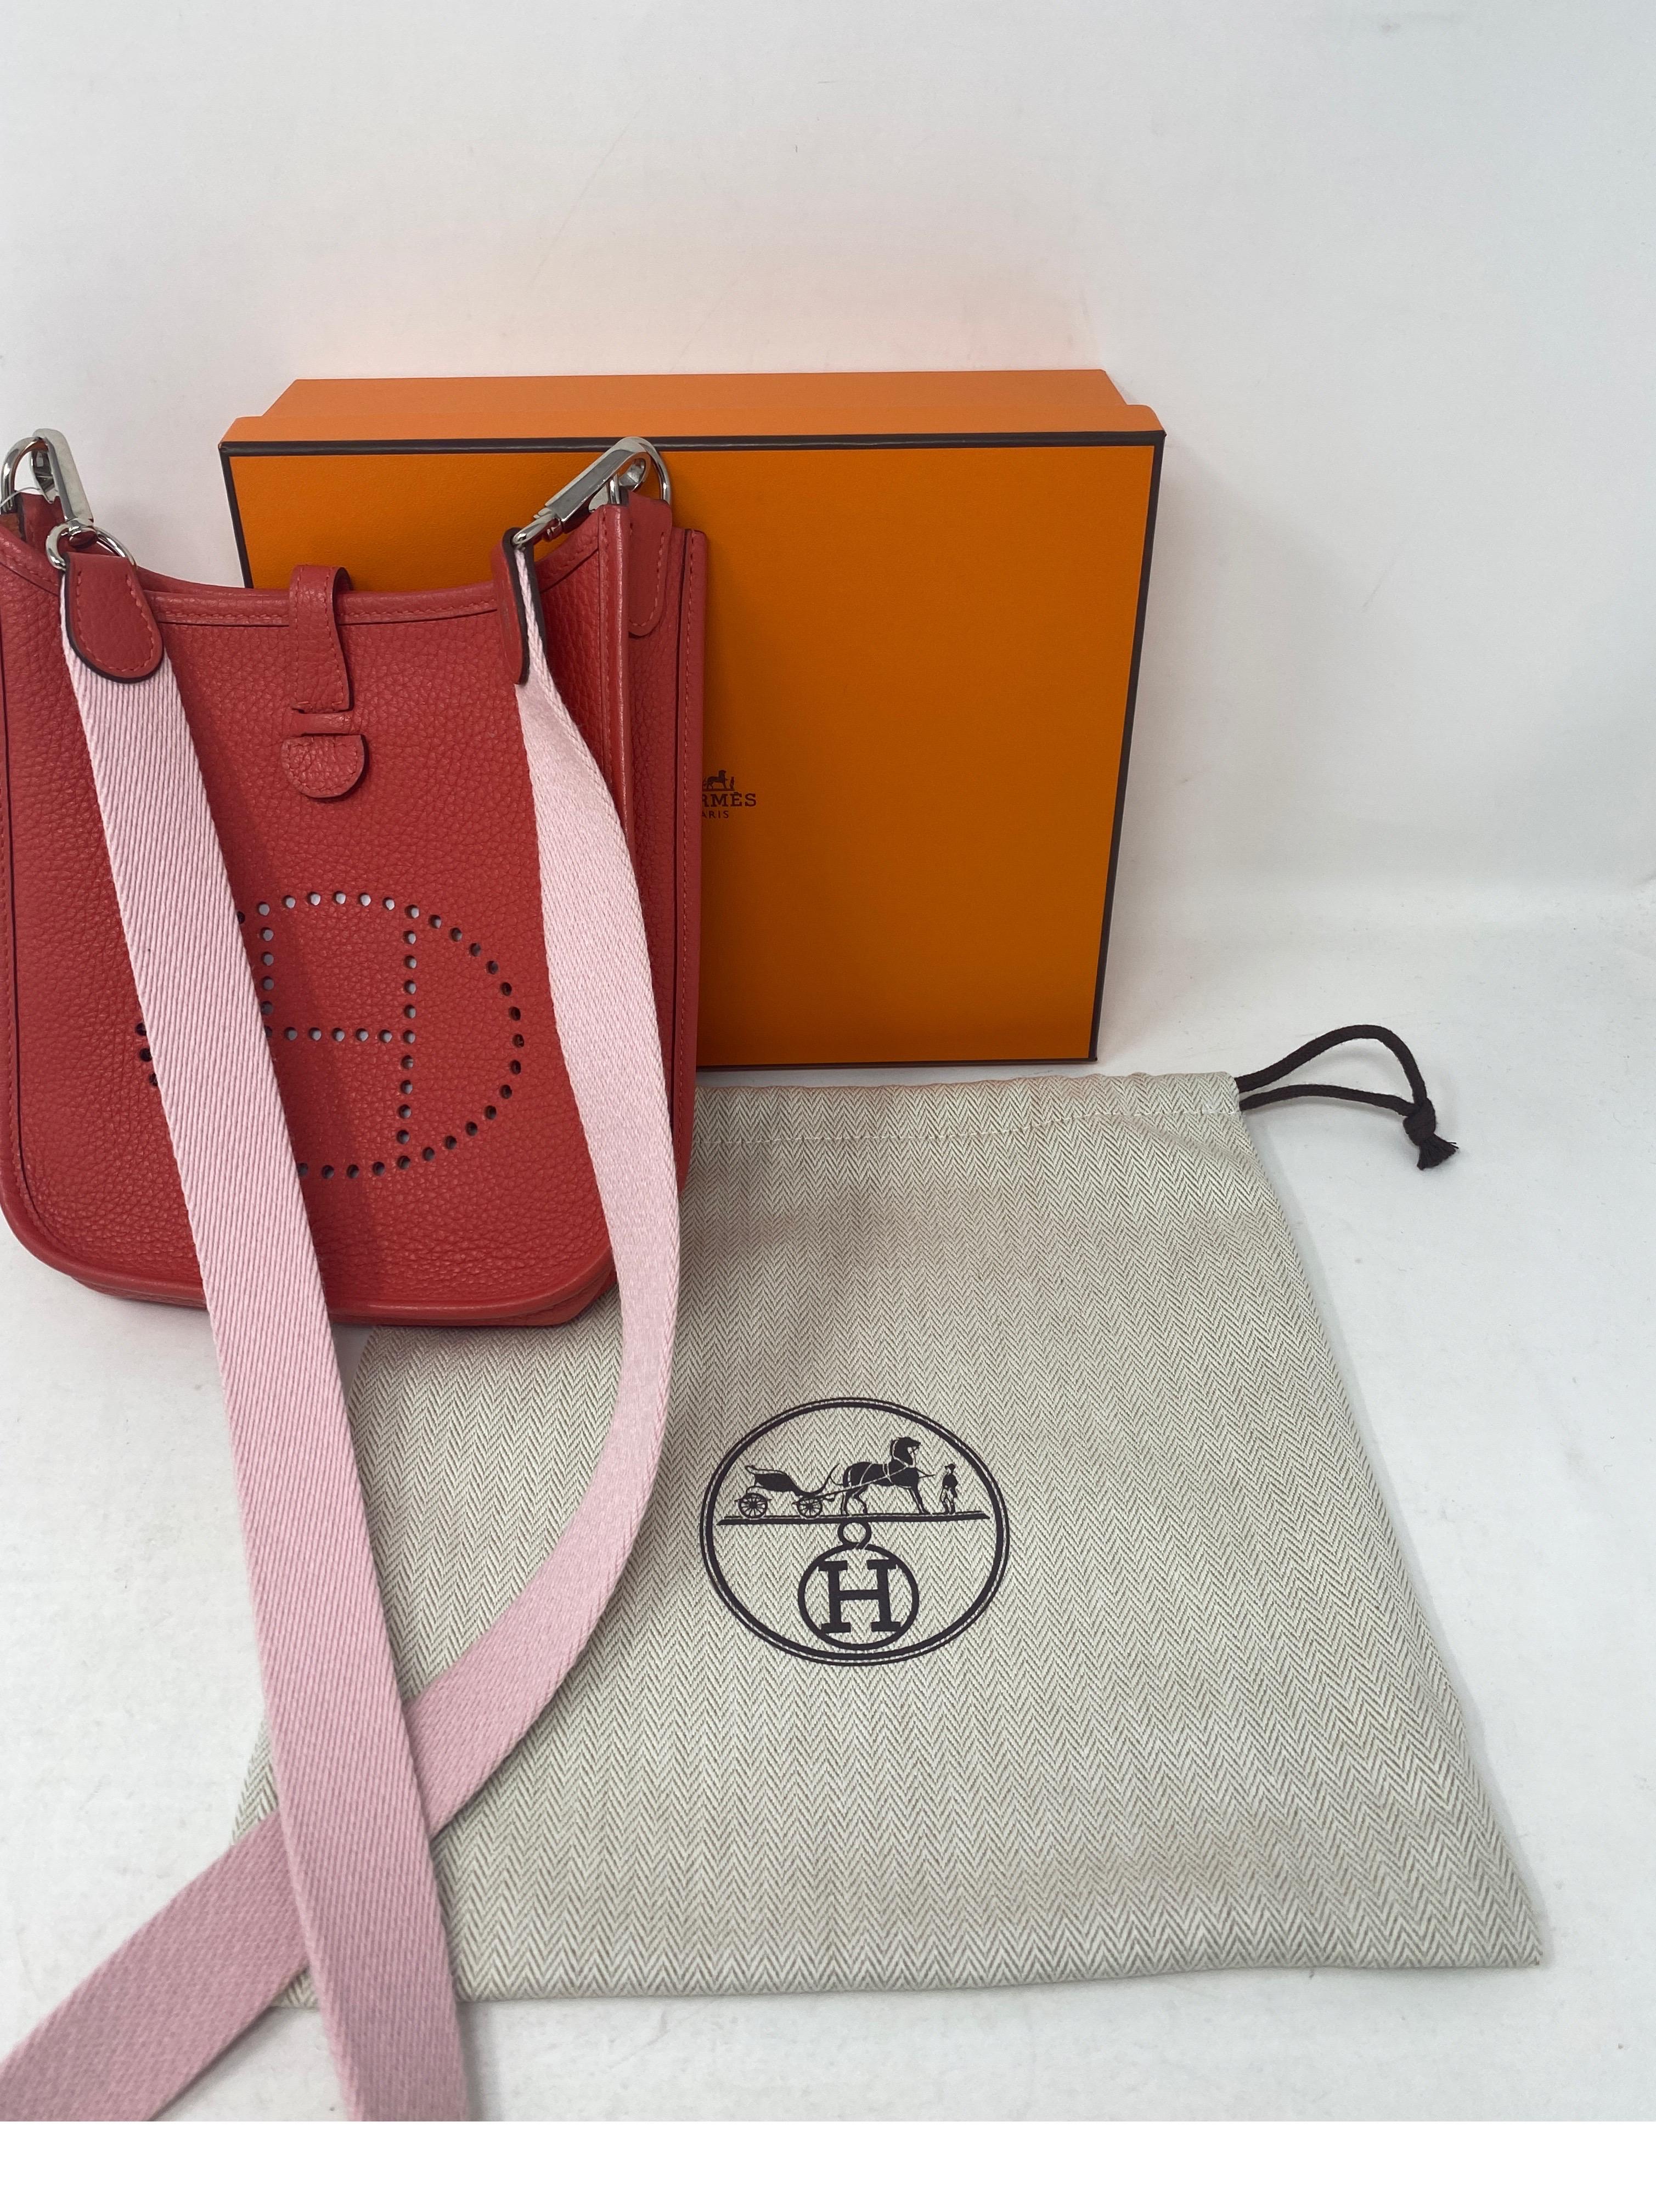 Hermes Evelyne TPM Rose Pivoine Bag. Mini version of the classic Evelyne bags. Rare and hard to find. Mint condition. Beautiful rose pivoine pink color bag with pale pink strap. Includes dust cover and box. Guaranteed authentic. 